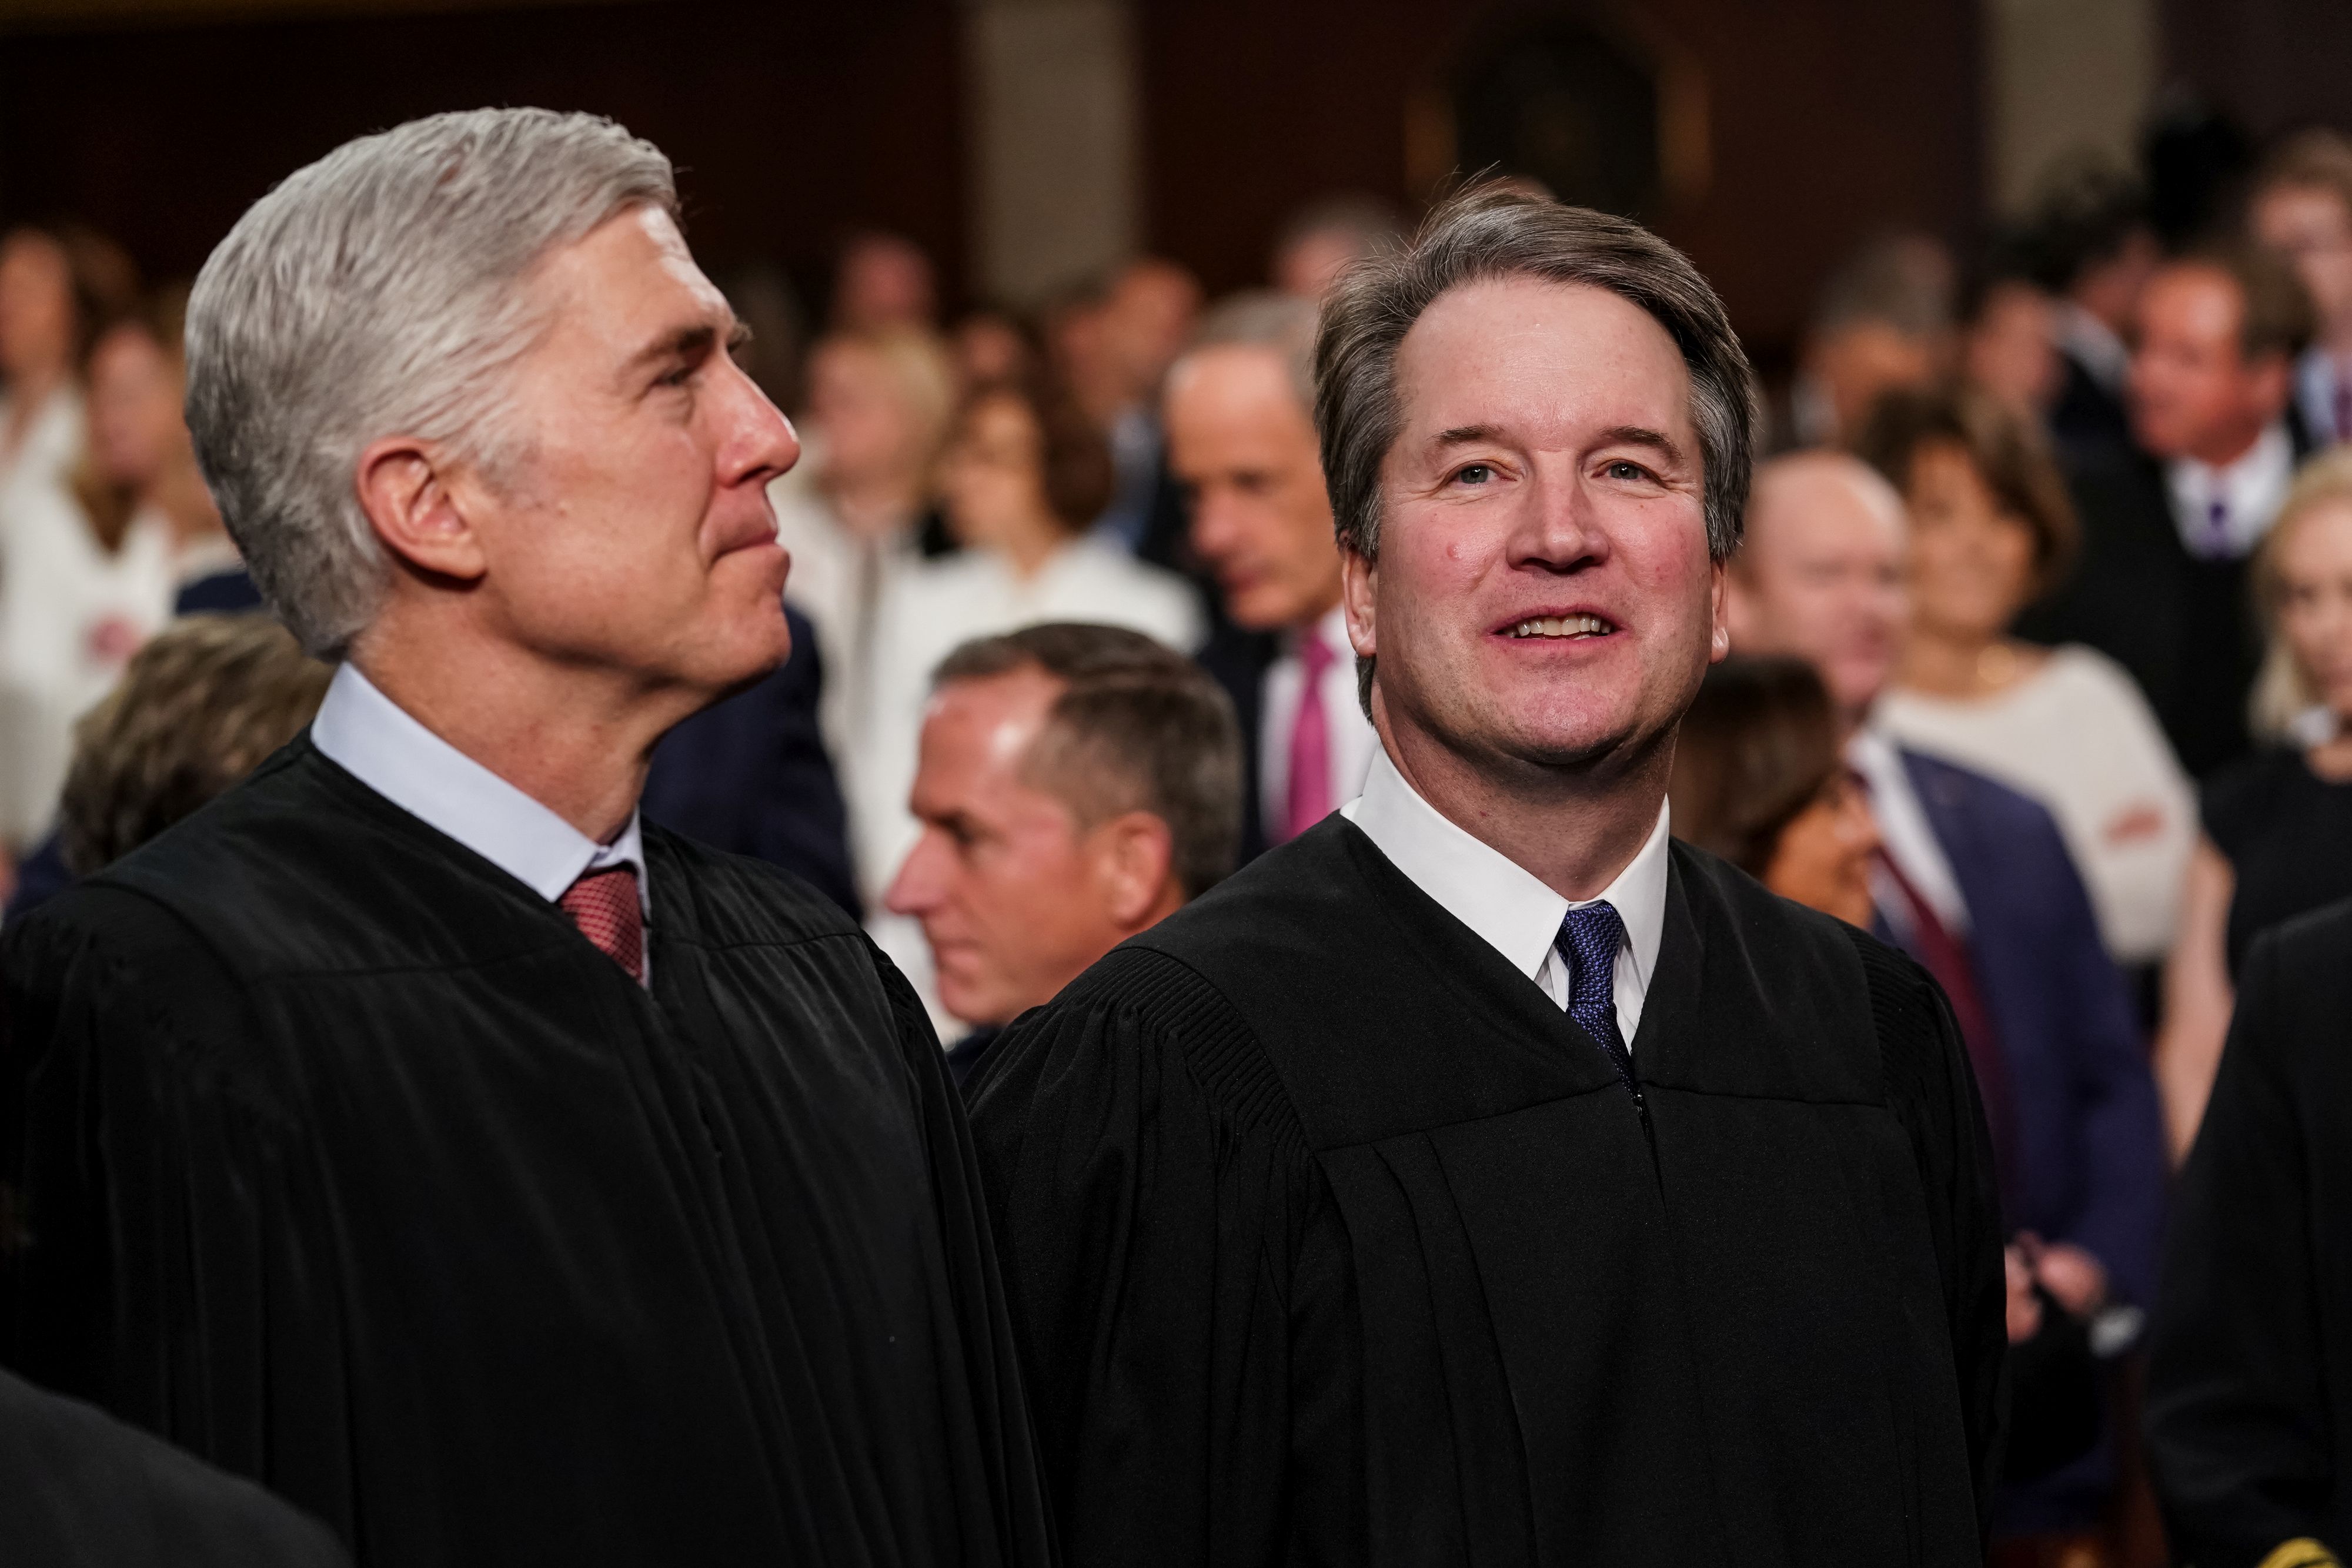 Supreme Court Justices Neil Gorsuch and Brett Kavanaugh attend the State of the Union address in the chamber of the U.S. House of Representatives at the U.S. Capitol Building